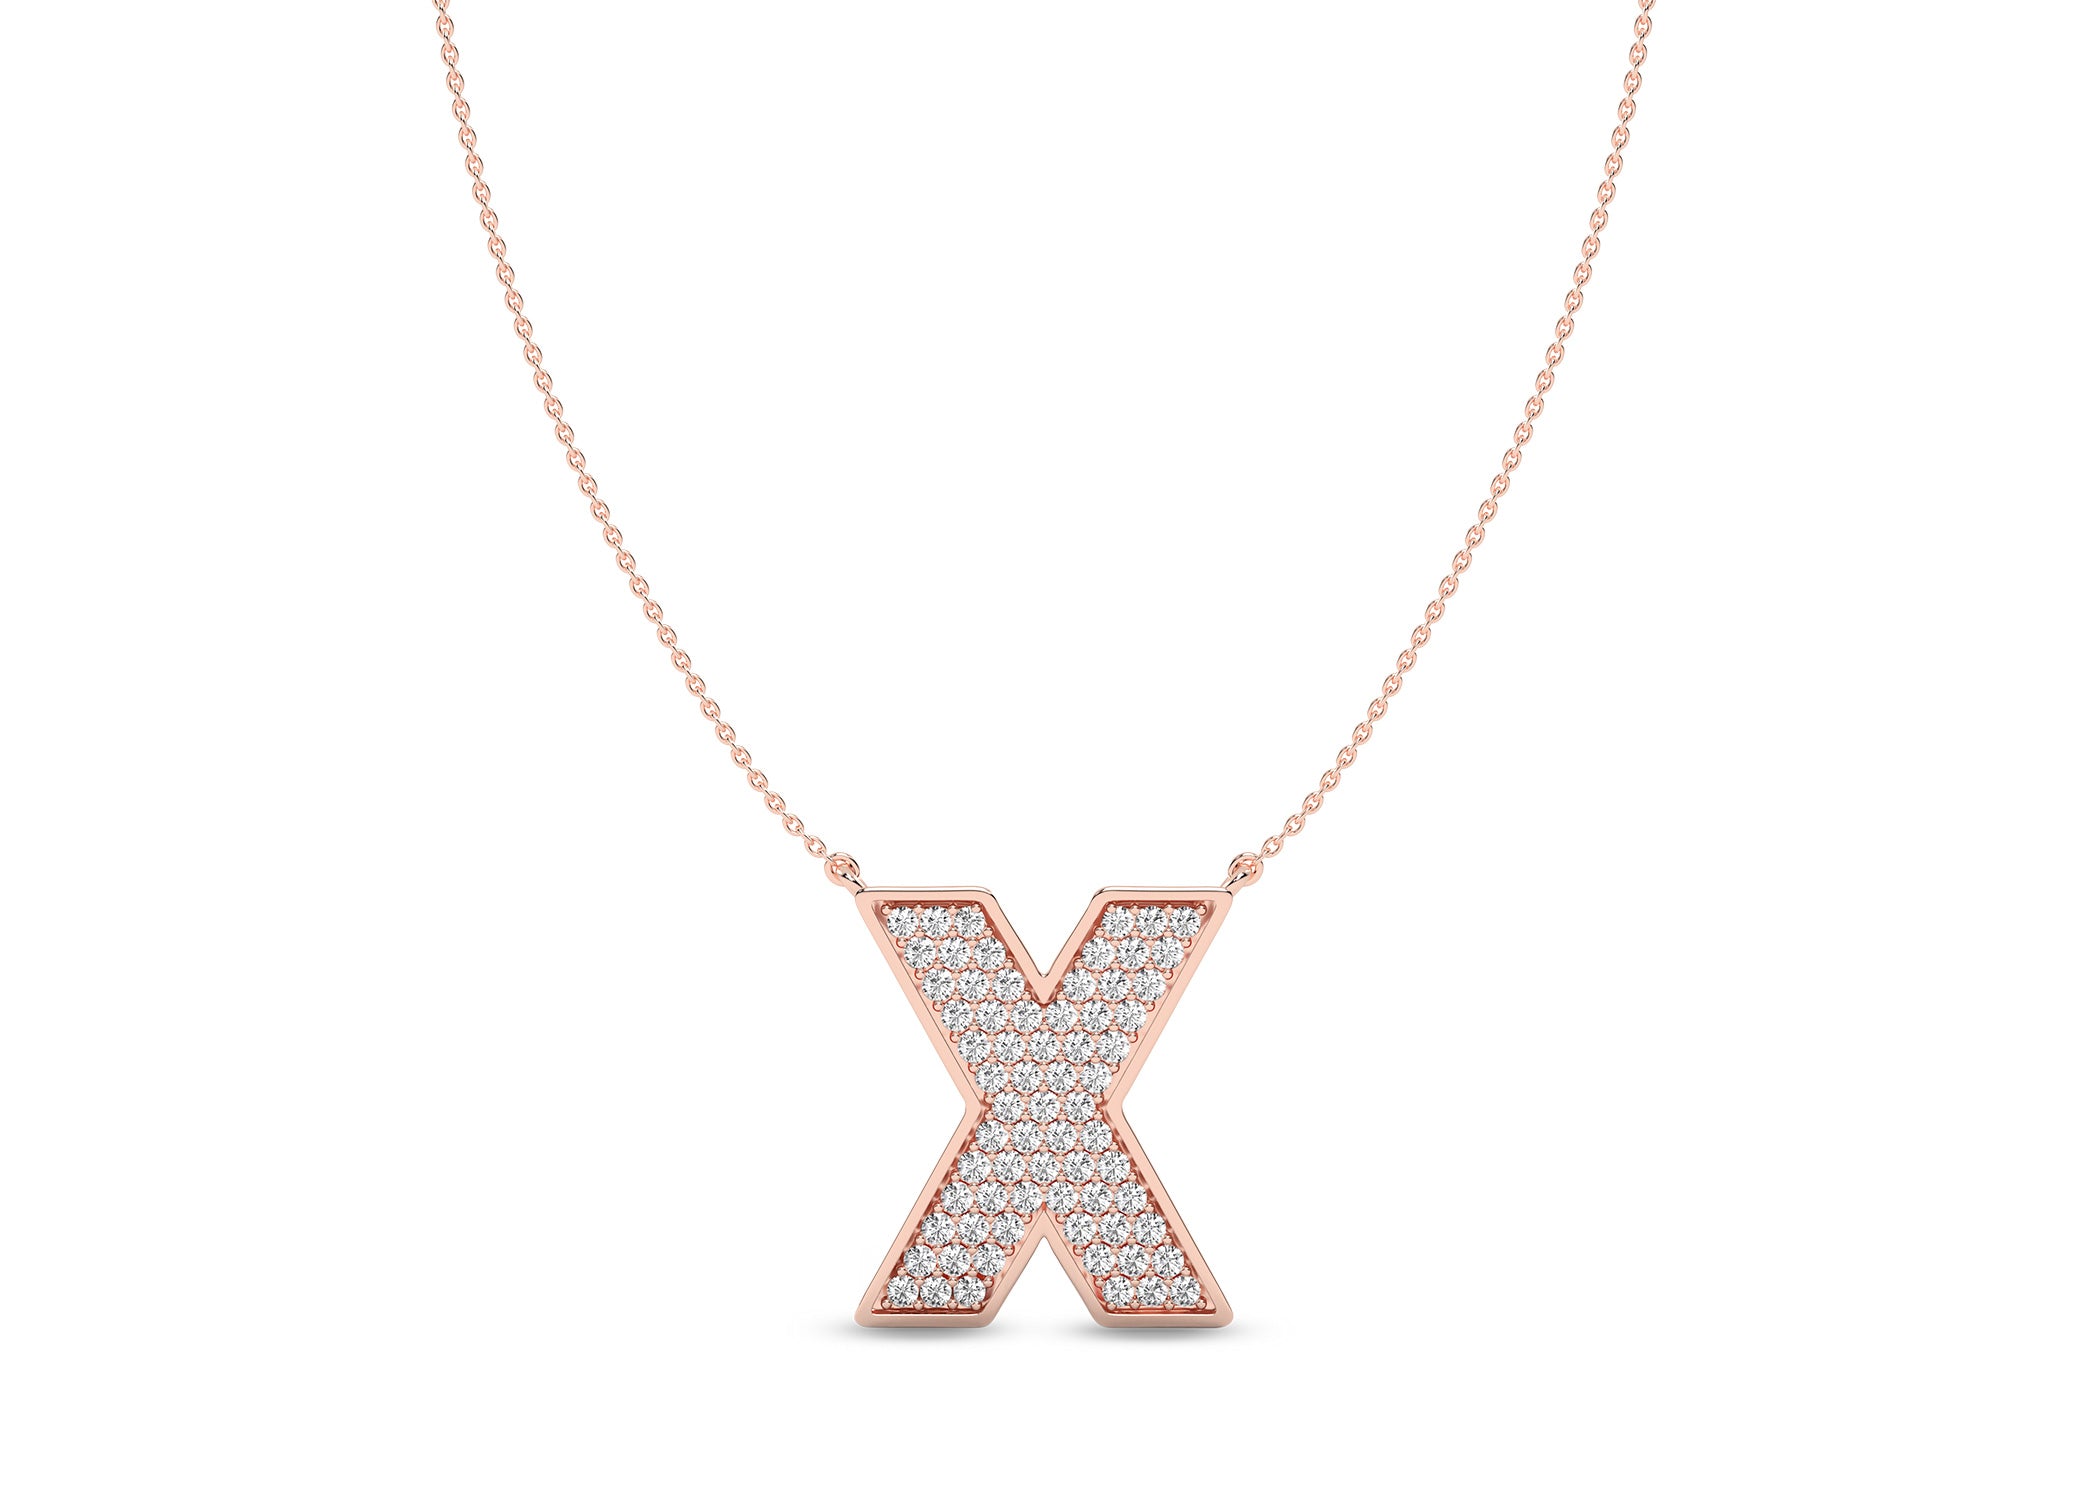 Embellished X Necklace Replica